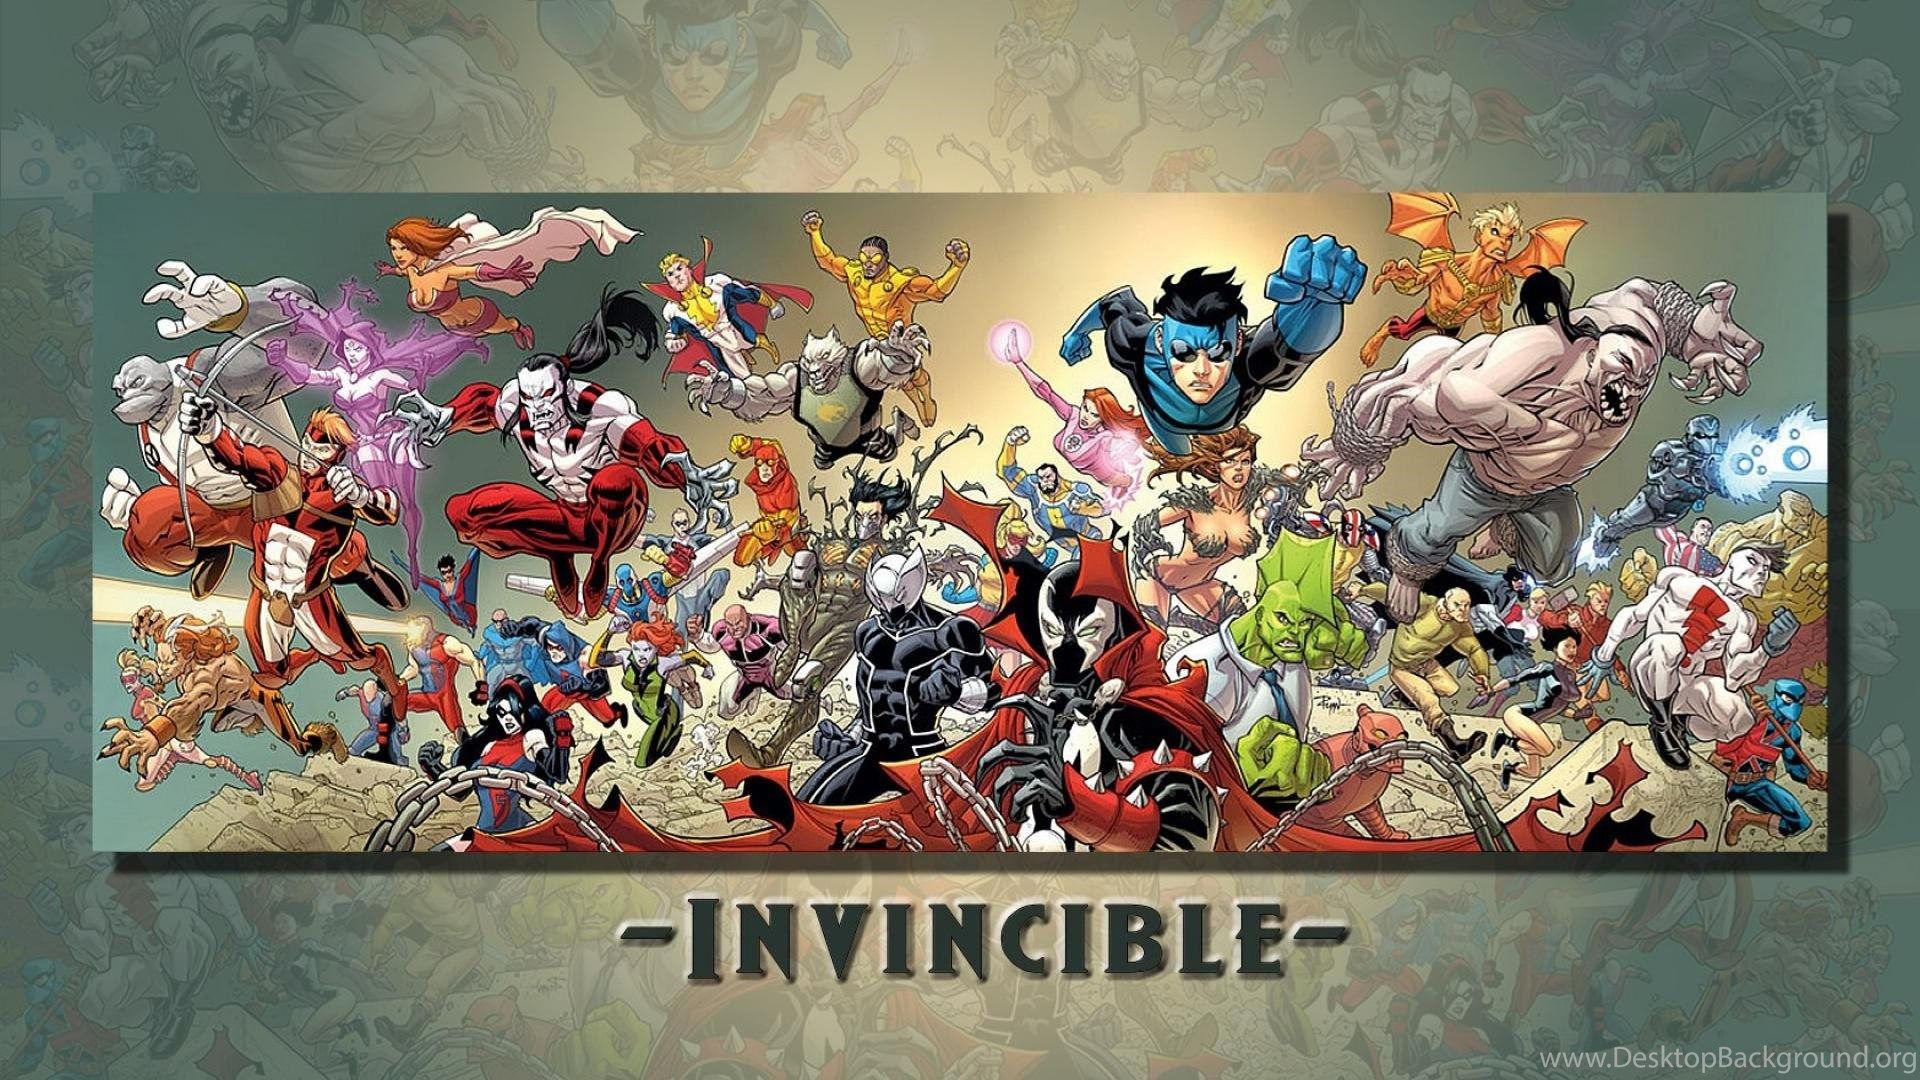 The Invincible Game Poster Wallpapers